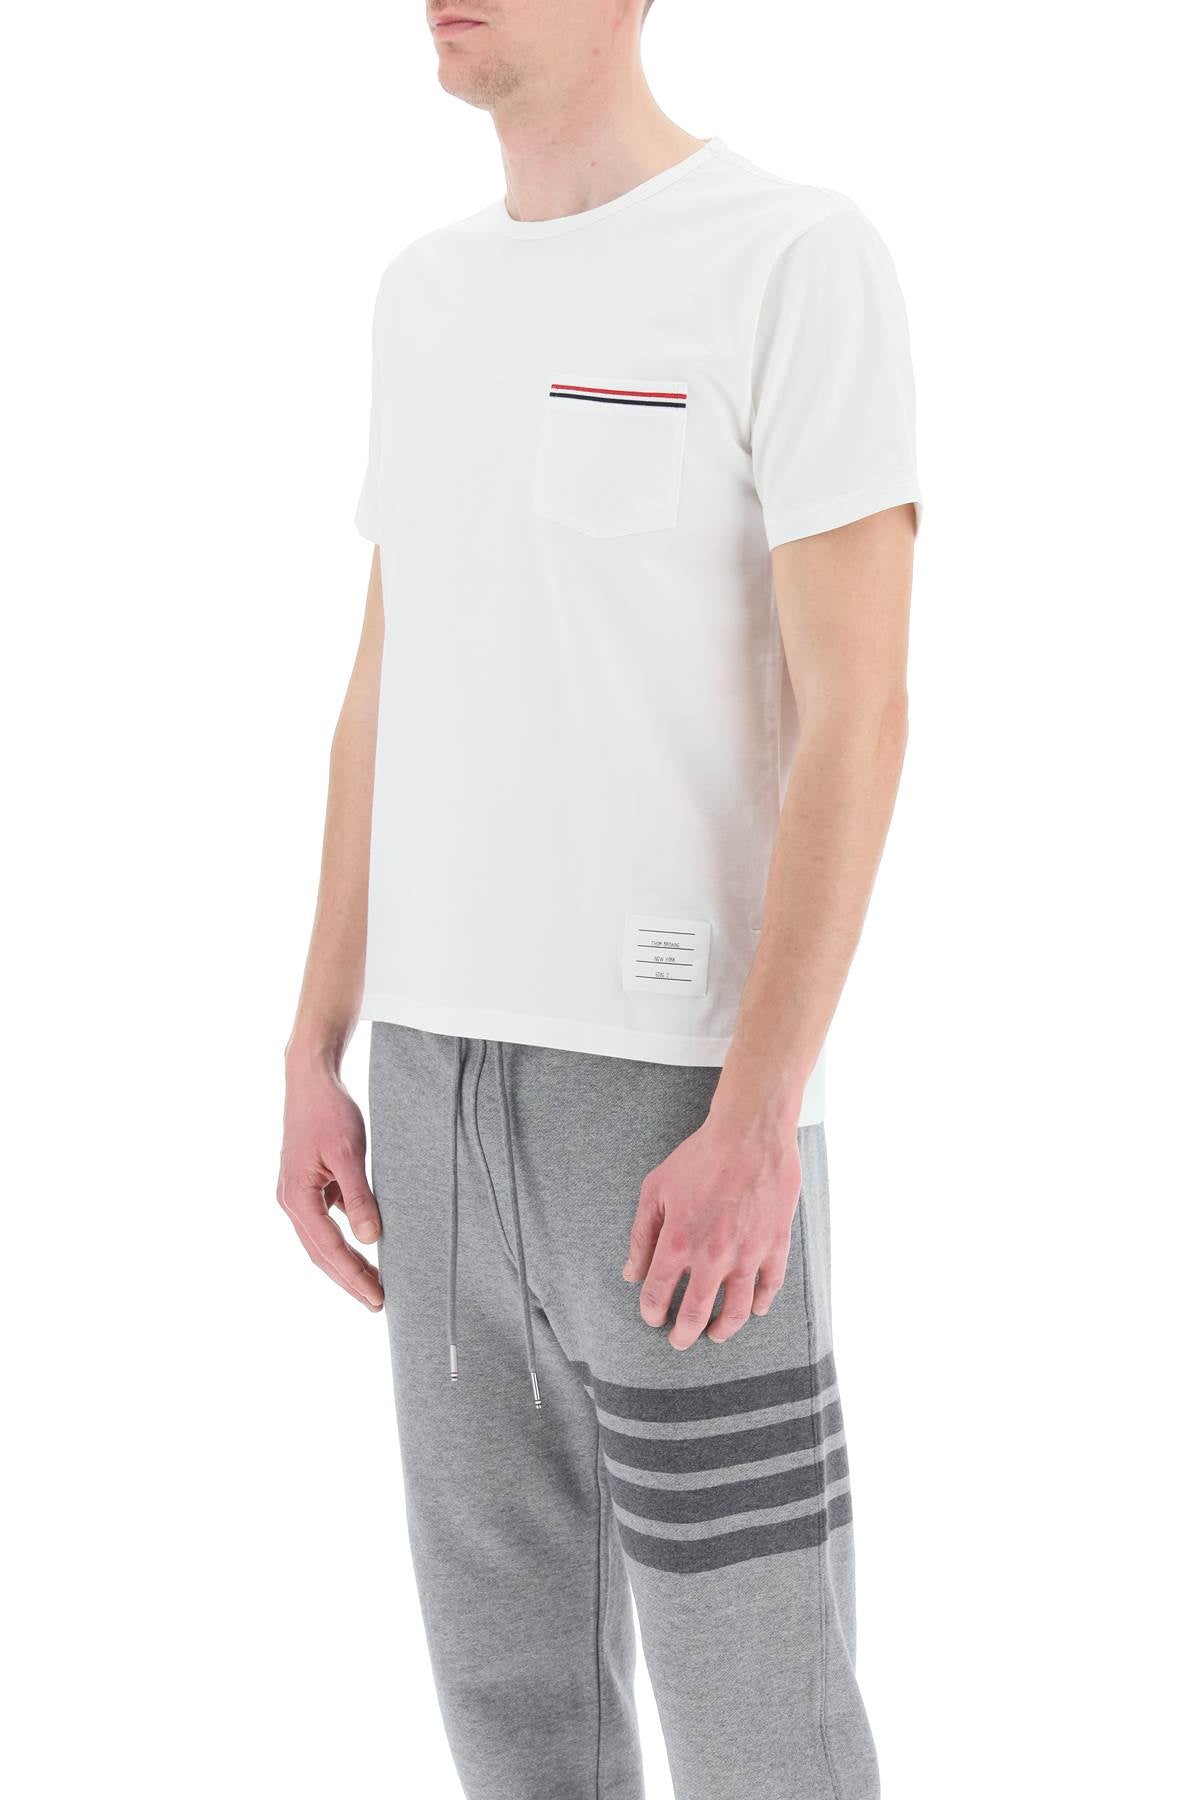 Thom browne t-shirt with tricolor pocket-3